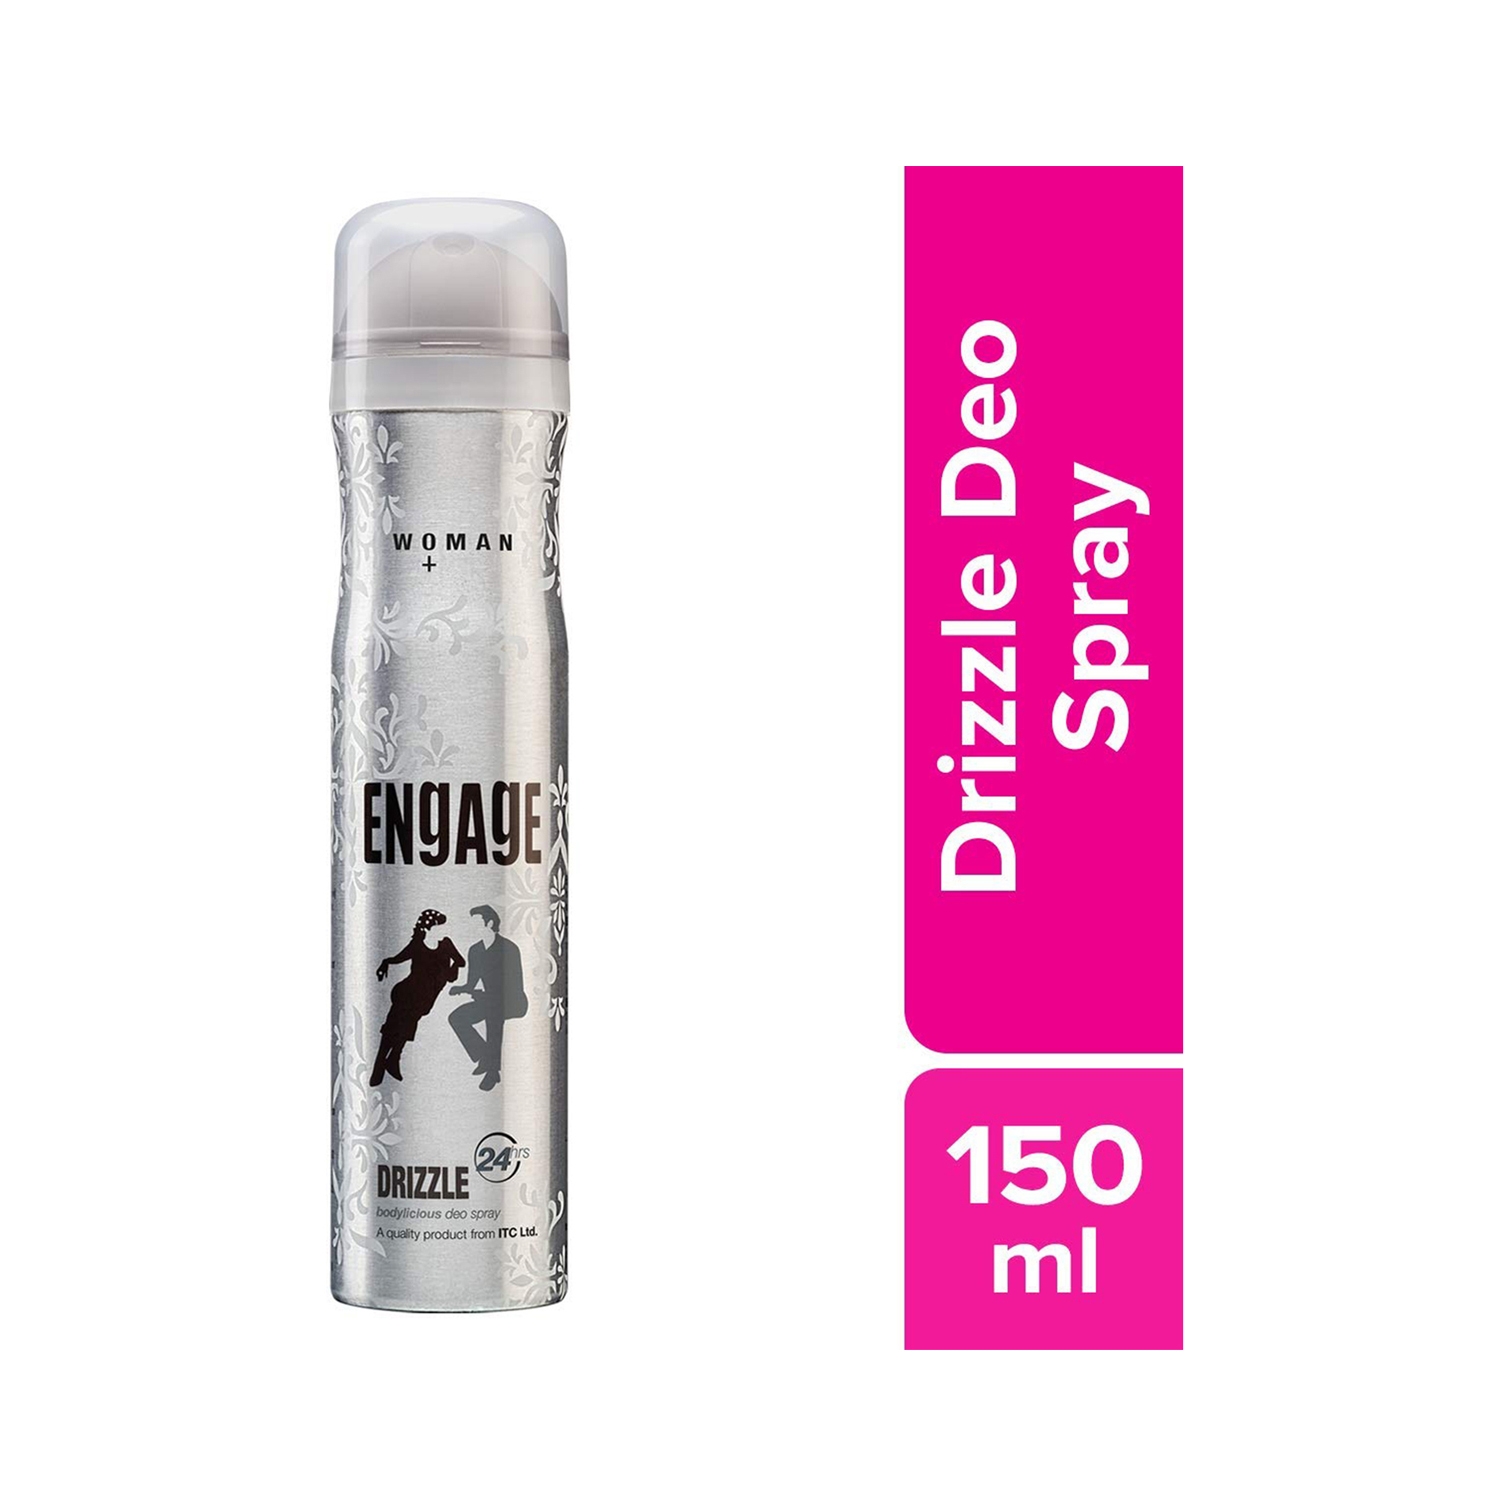 Engage | Engage Drizzle Deodorant Spray For Women (150ml)